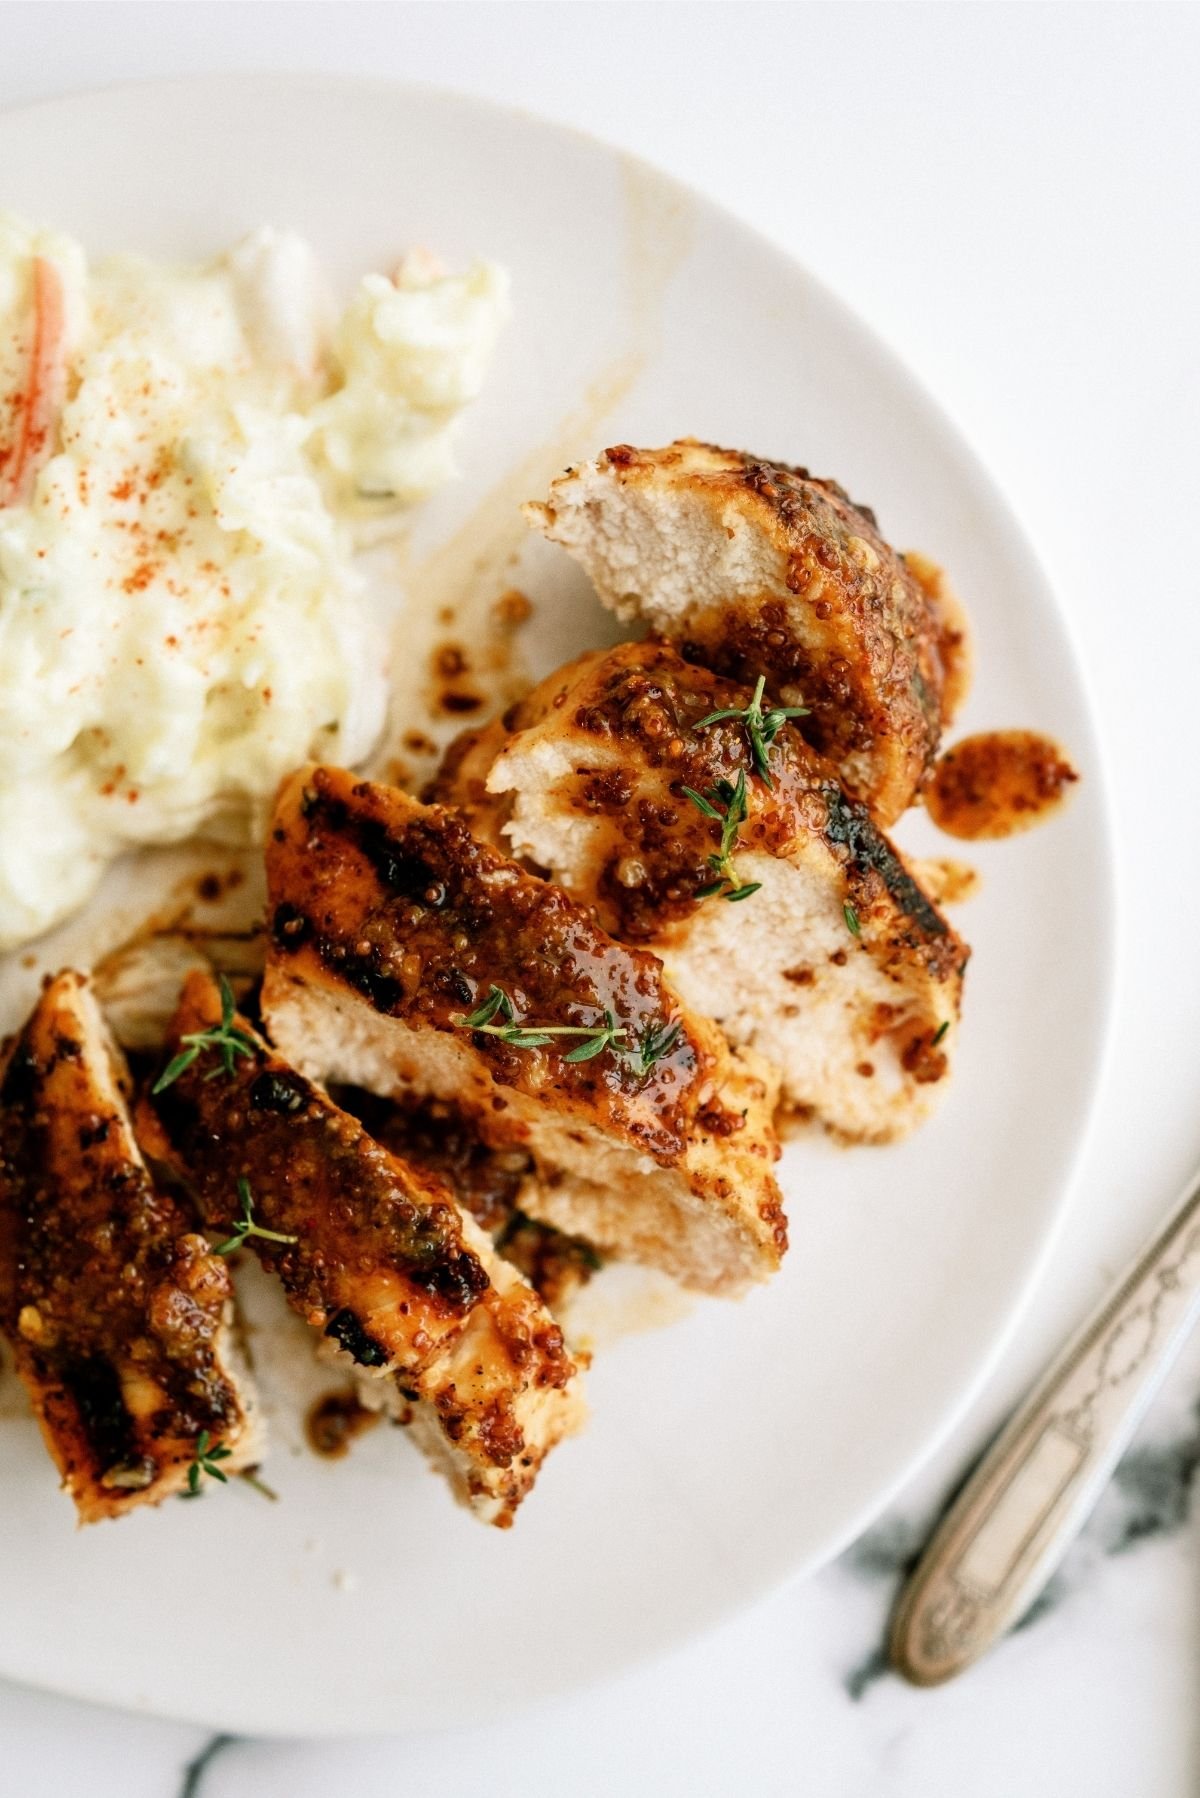 Sliced Grilled Honey Mustard Chicken on a plate served with potato salad